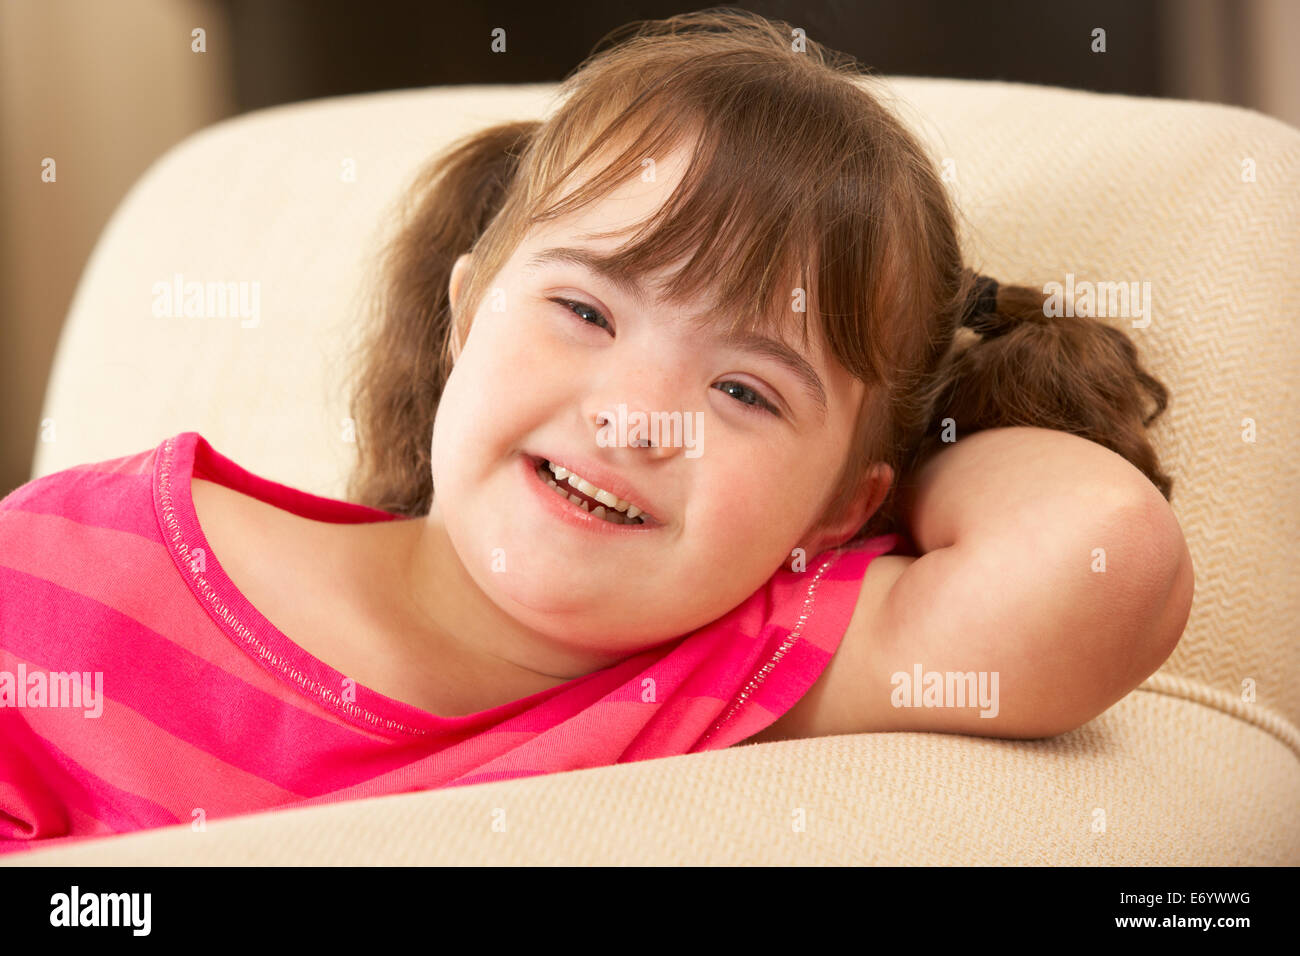 6 year old girl with Downs Syndrome Stock Photo